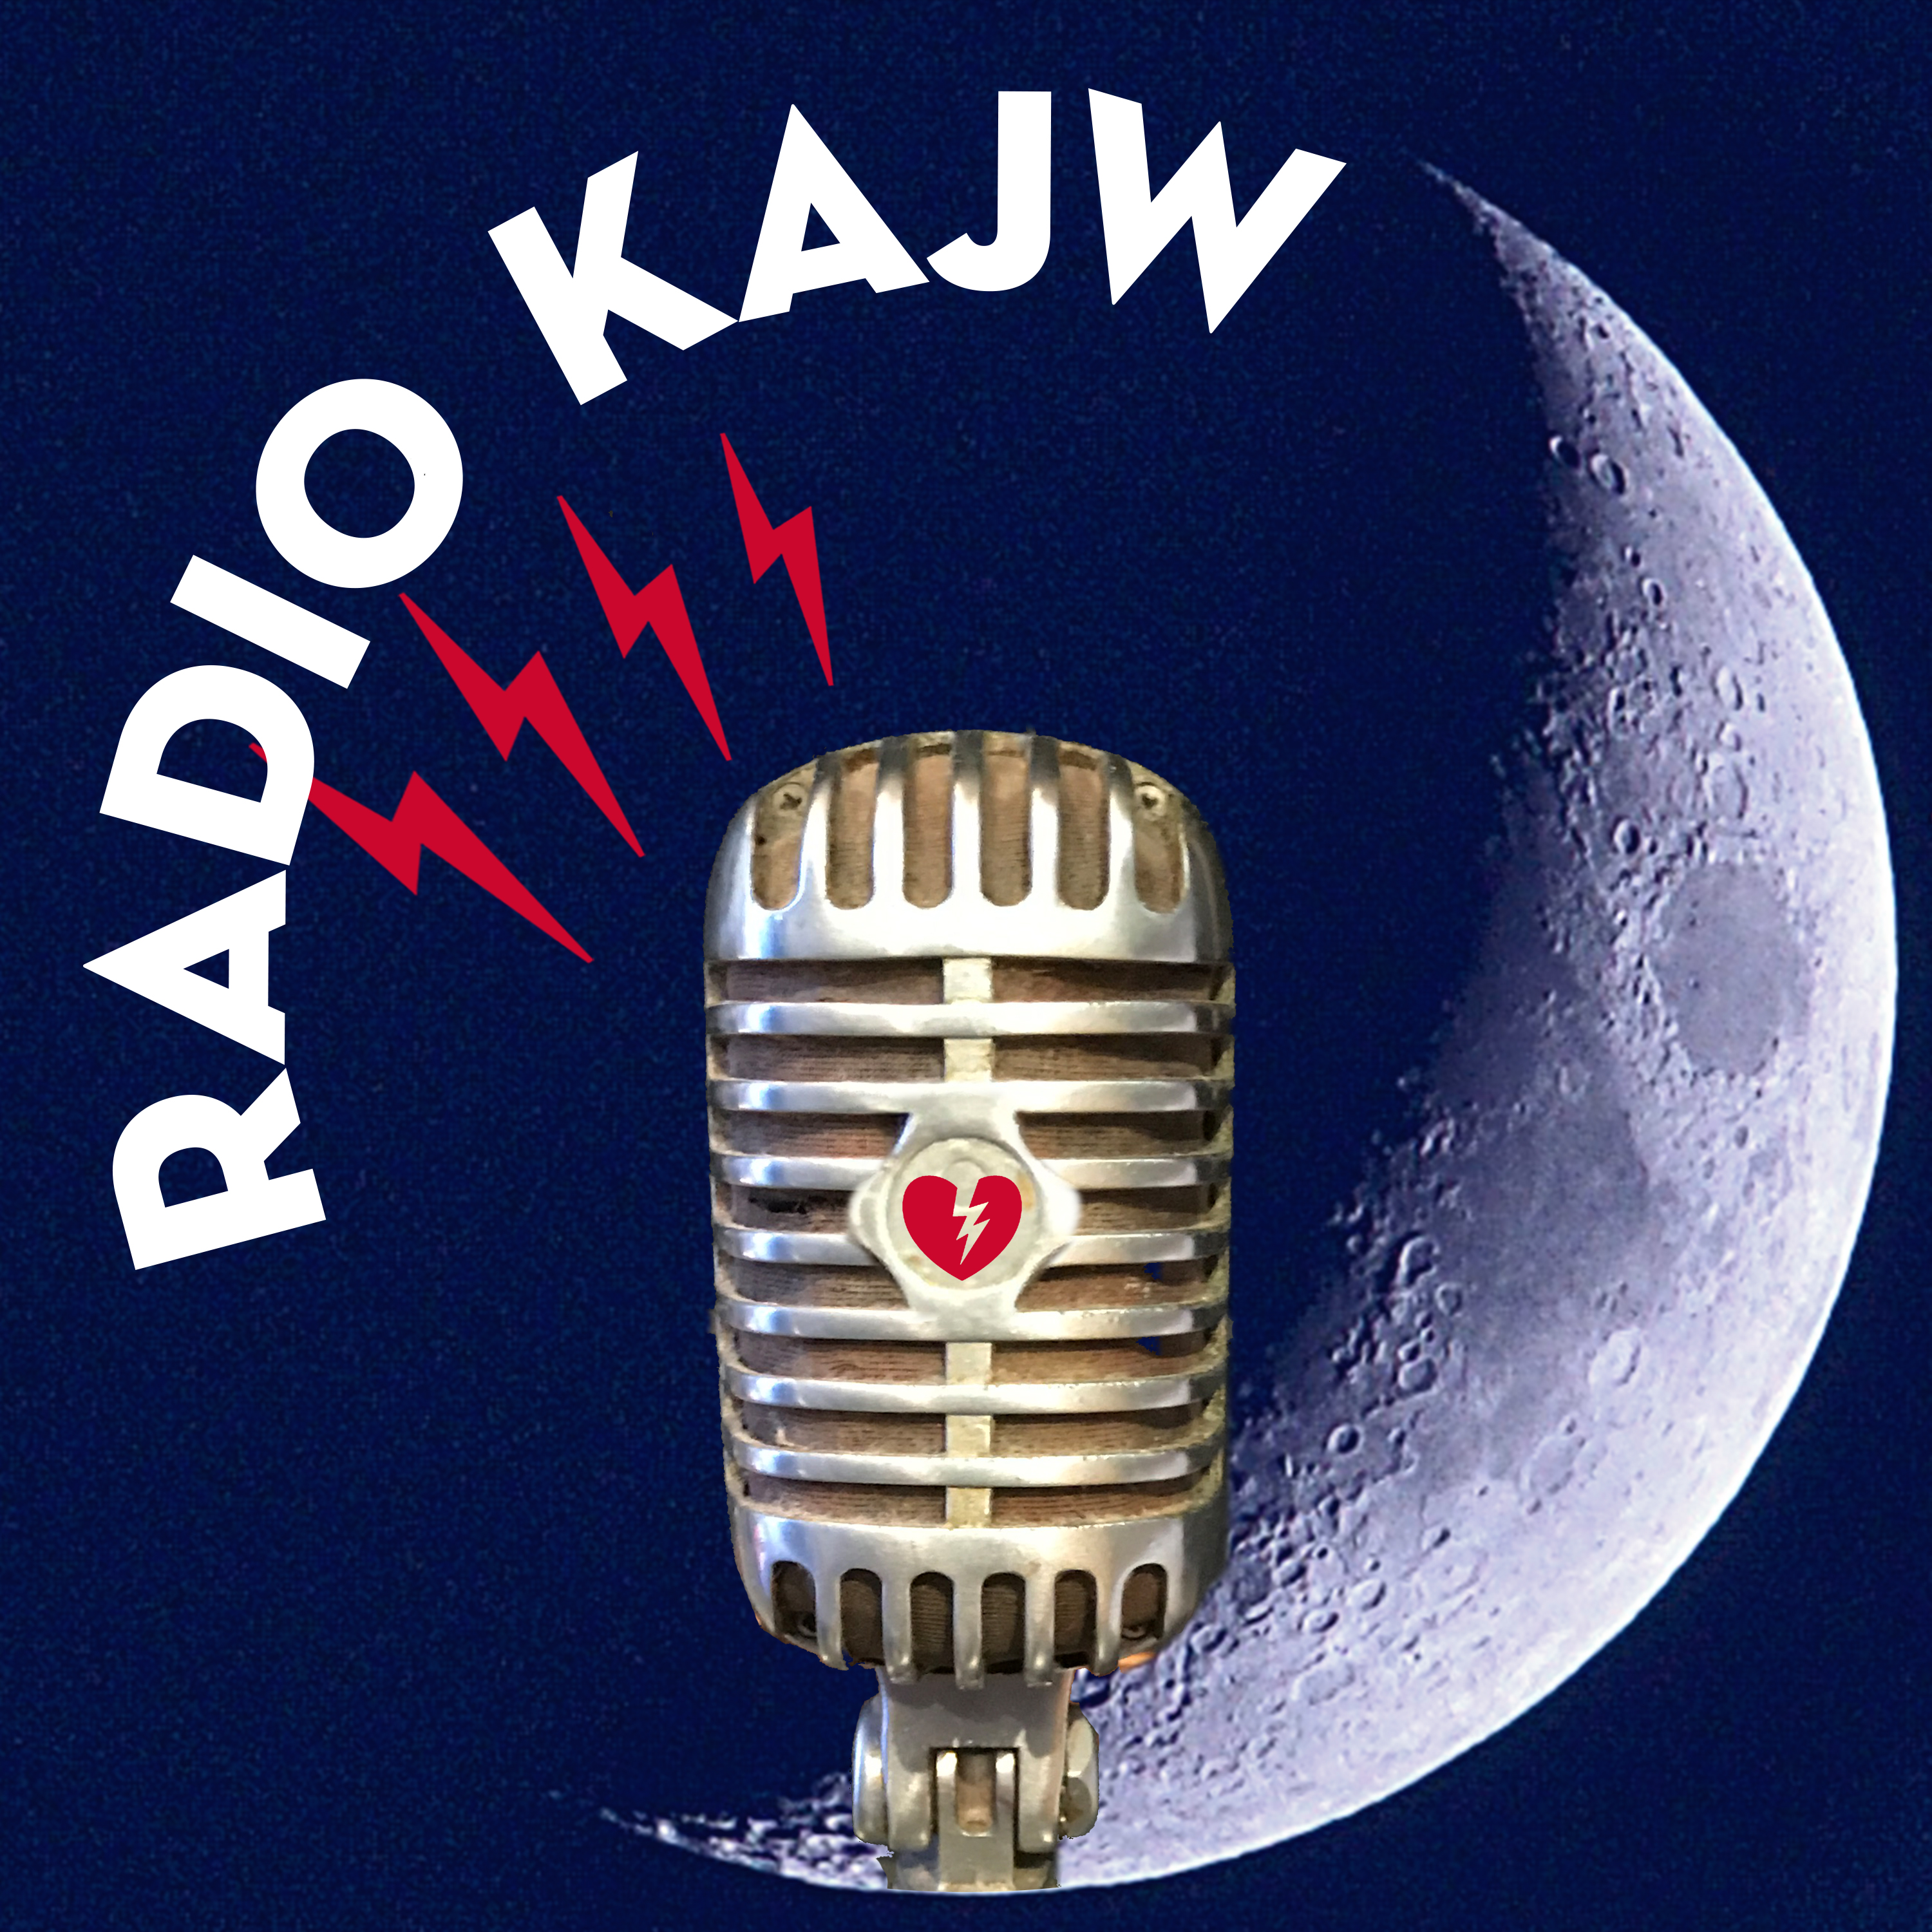 Art for Station ID 12 M1N-D.Thank you so much for listening by RadioKAJW